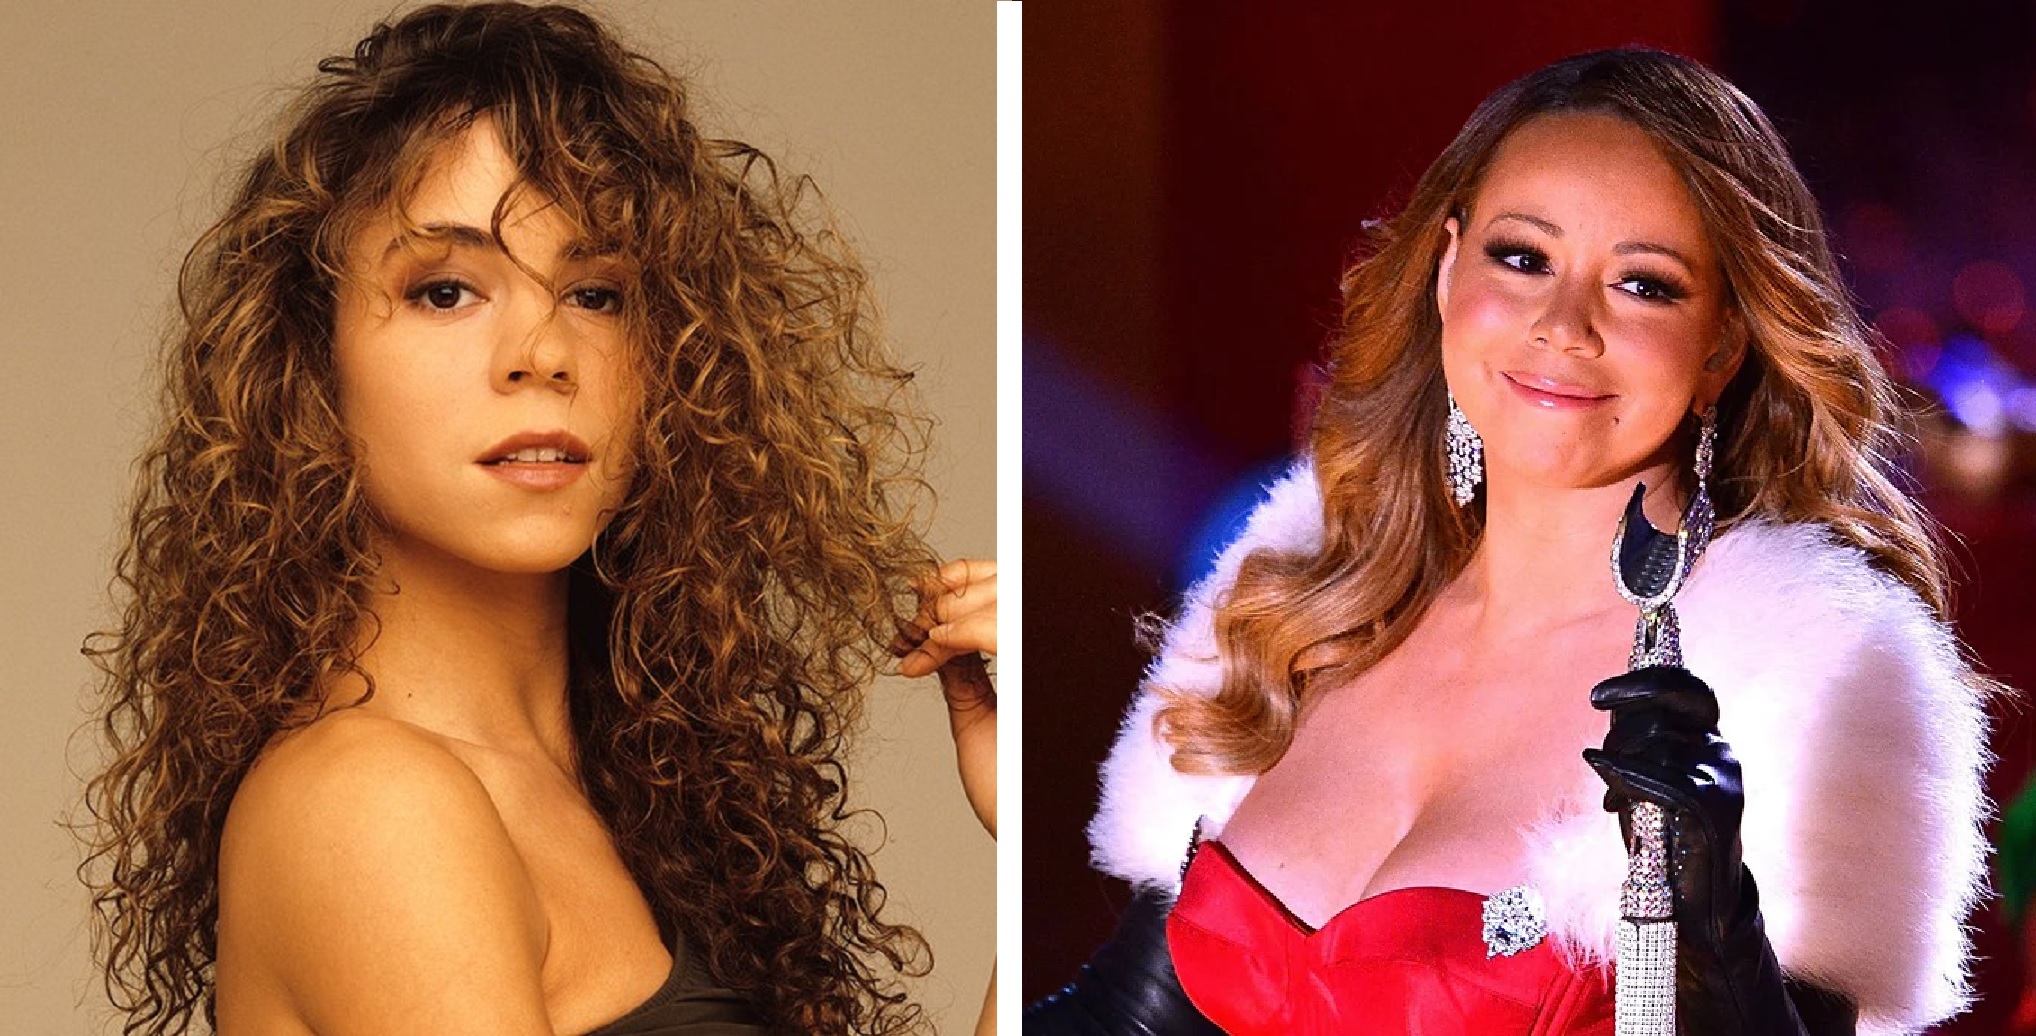 Poll: Vote For Your Favorite Mariah Carey Song Out Of Her 19 Billboard #1’s